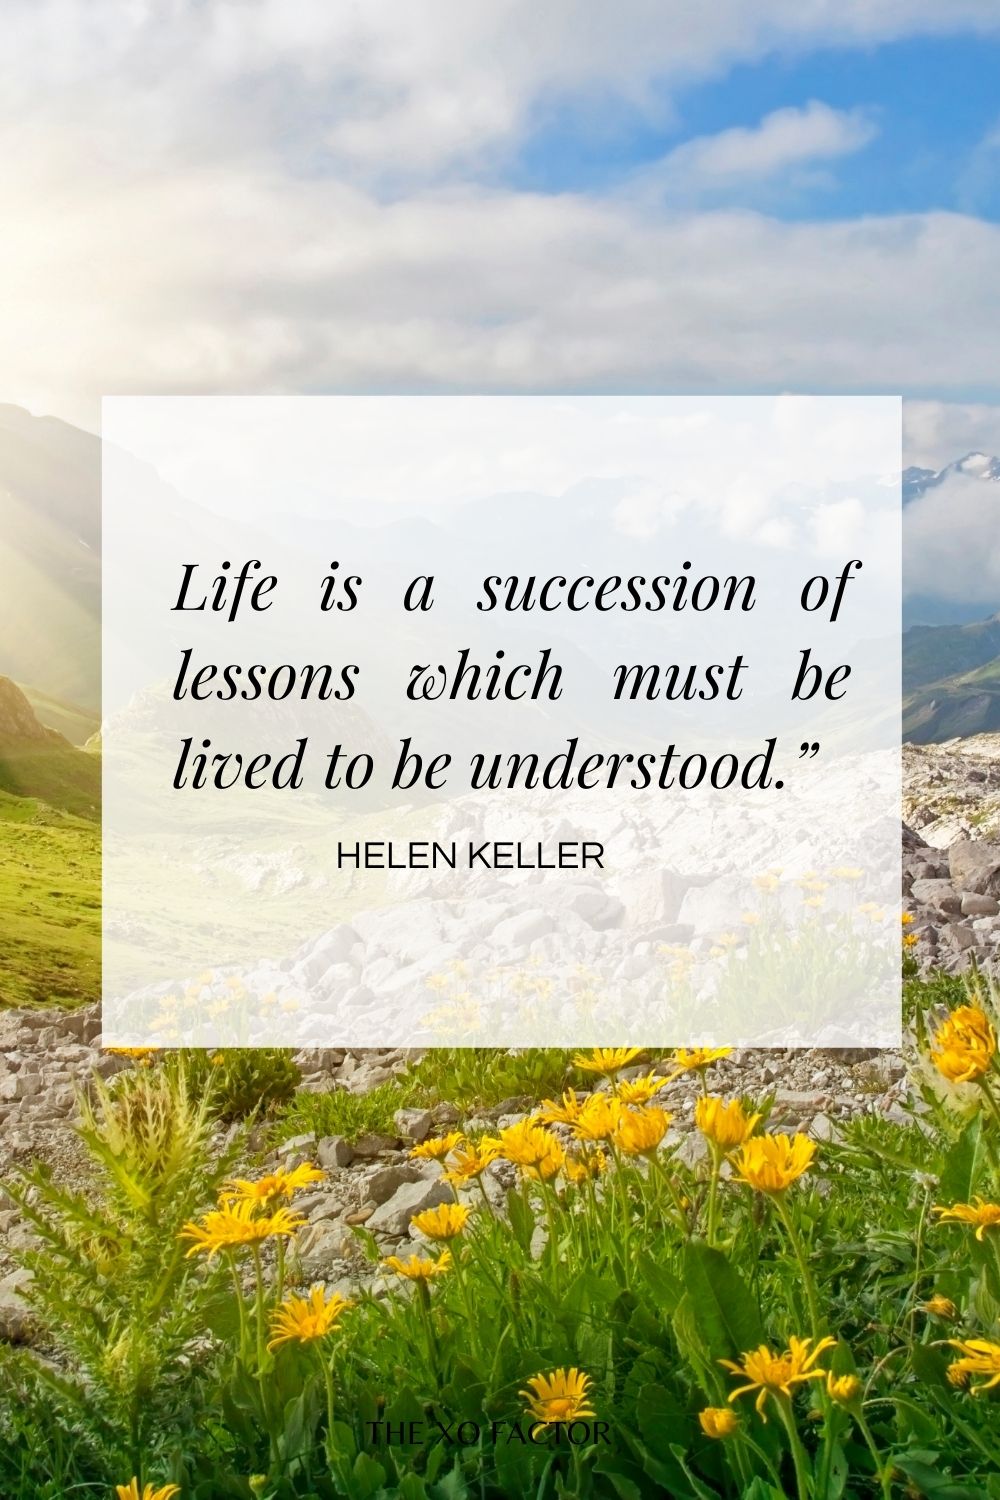 Life is a succession of lessons which must be lived to be understood.”  Helen Keller